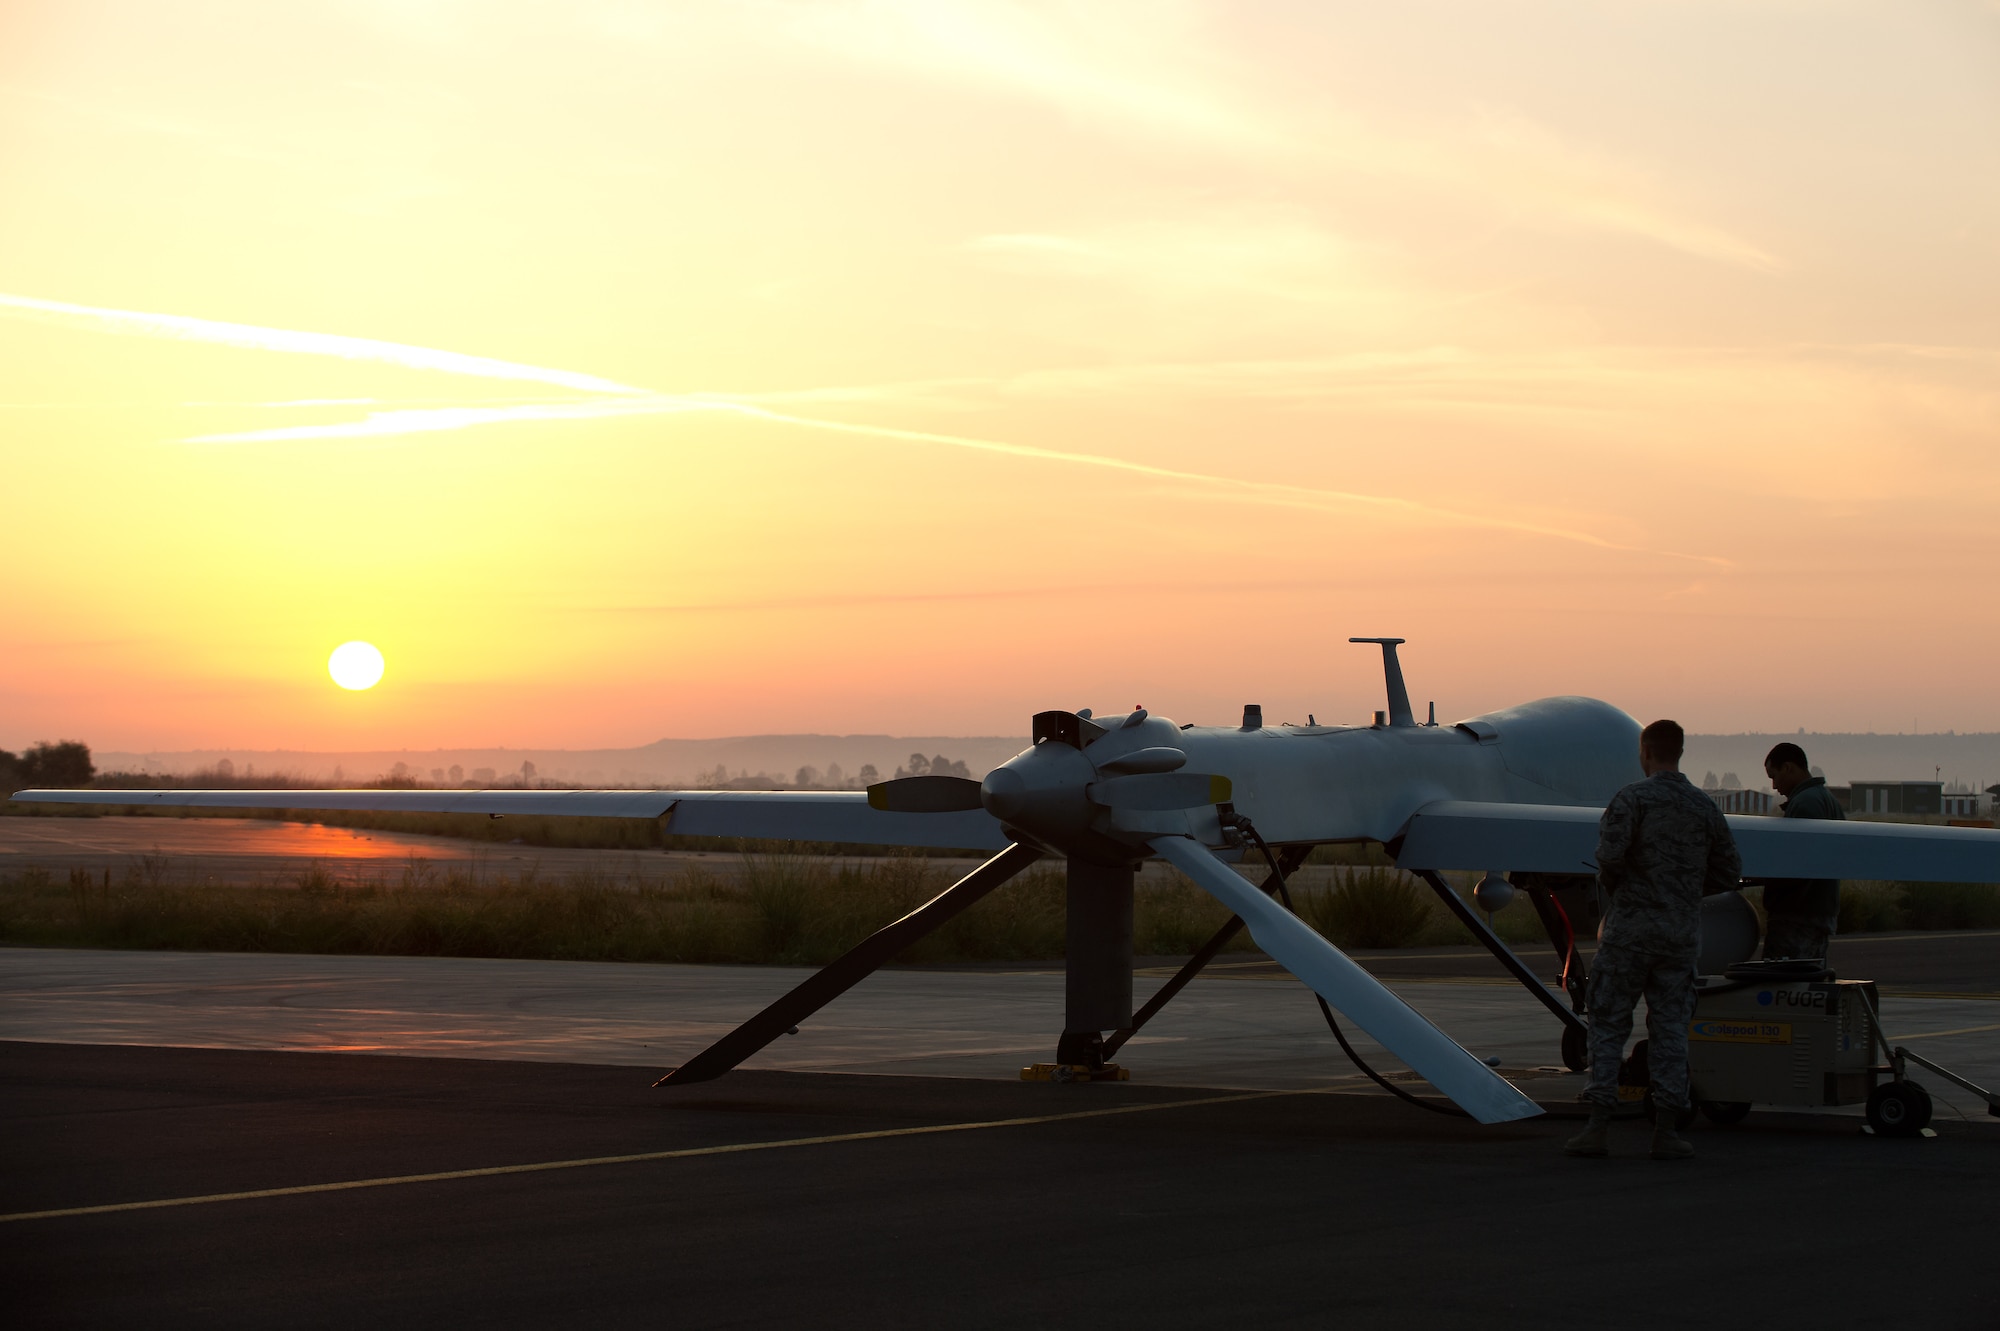 Airmen attached to the 324th Expeditionary Reconnaissance Squadron, based out of 432nd Wing/432nd Air Expeditionary Wing at Creech Air Force Base, Nev., perform a preflight inspection on an MQ-1 Predator remotely piloted aircraft as the wing passed the 2 million flying hour milestone Oct. 22, 2013. Since initial operations began in 1995 to April 2011 the wing flew their first 1 million hours. Due in large part to total force integration efforts and an expansion of combat air patrols the 2 million hour mark was achieved 32 months later, culminating in more than 215,000 total missions completed and nearly 94-percent of all missions flown in support of major combat operations. (U.S. Navy photo by Mass Communication Specialist 2nd Class Brian T. Glunt/Released)